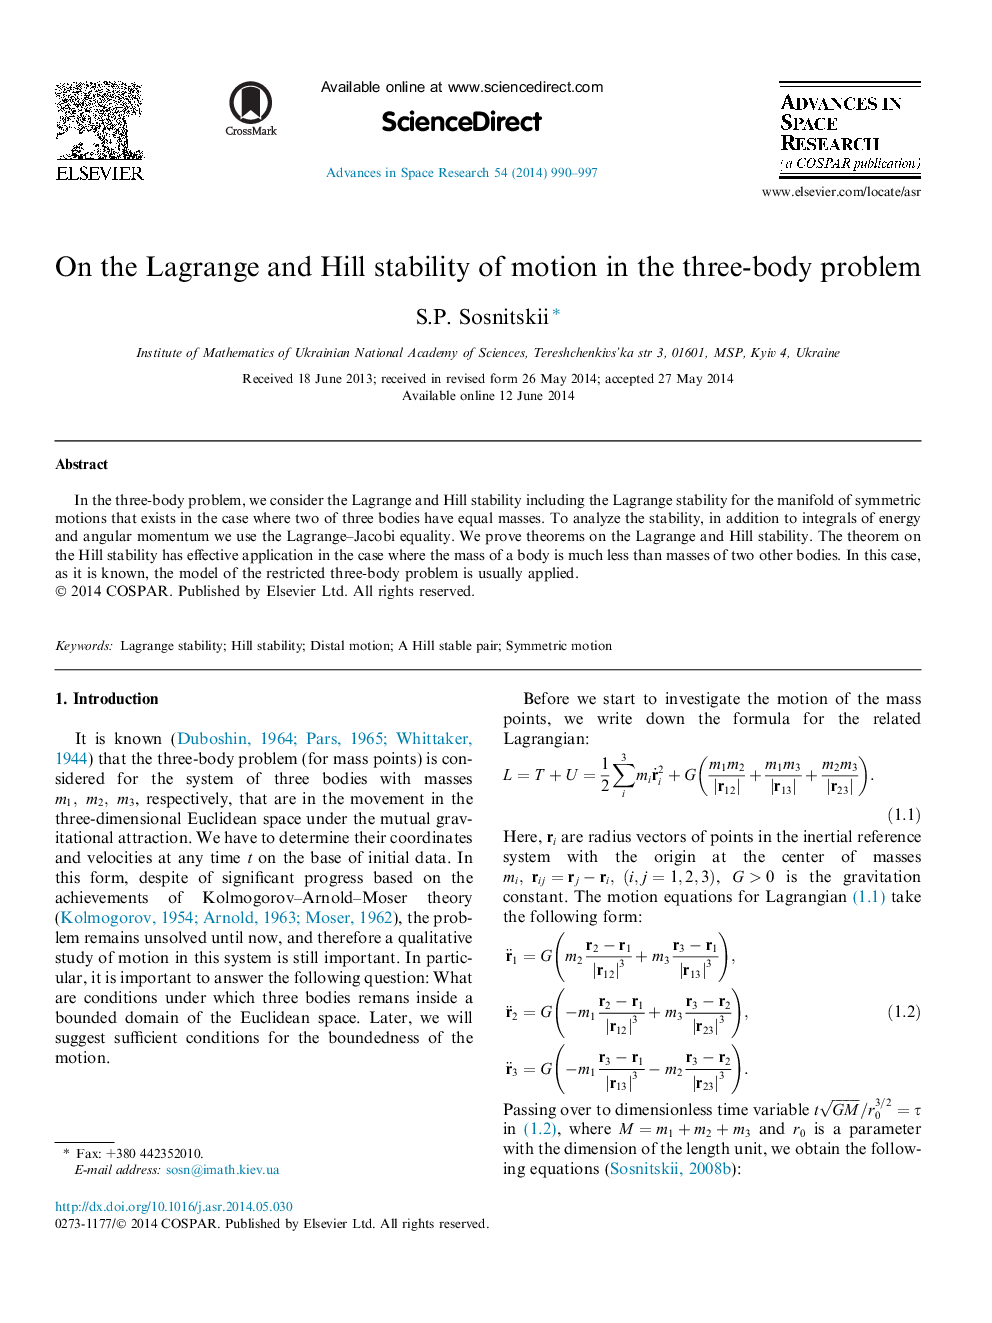 On the Lagrange and Hill stability of motion in the three-body problem